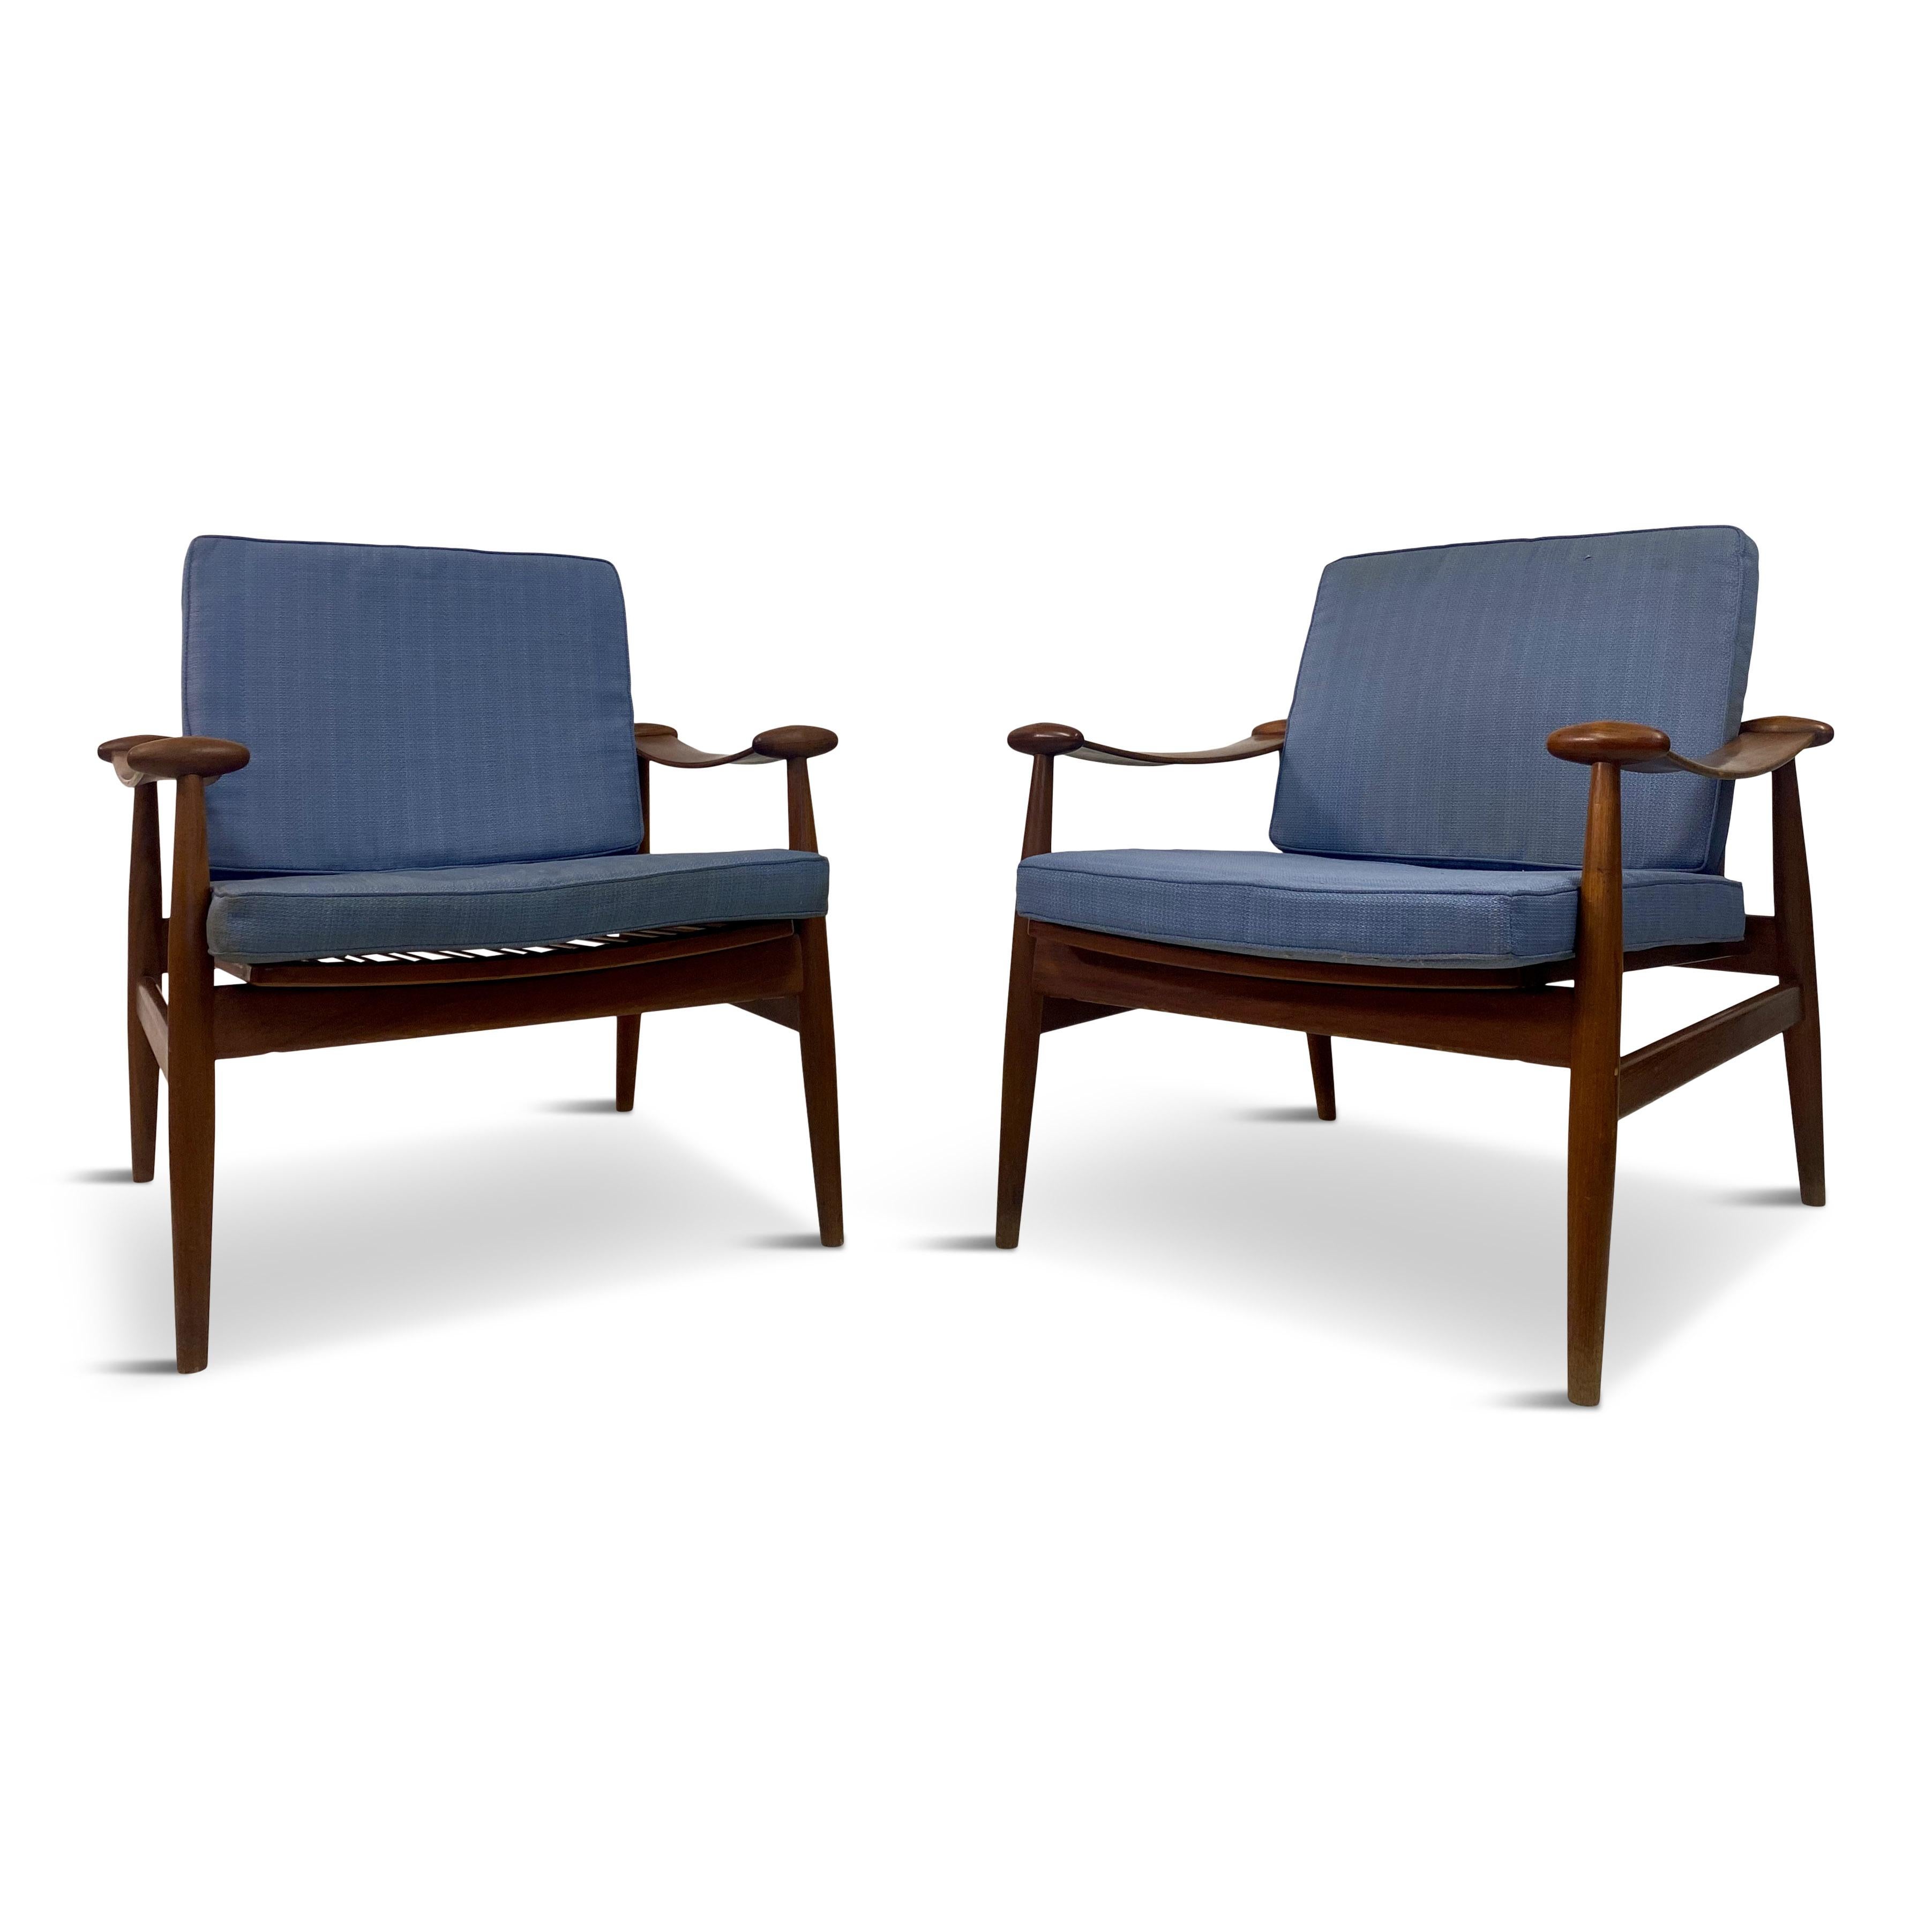 Pair of lounge chairs

By Finn Juhl

For France and Daverkosen 

Model FD133 and also known as the spade chair

Teak

Early version

Price includes reupholstery but not fabric

Danish 1950s/1960s